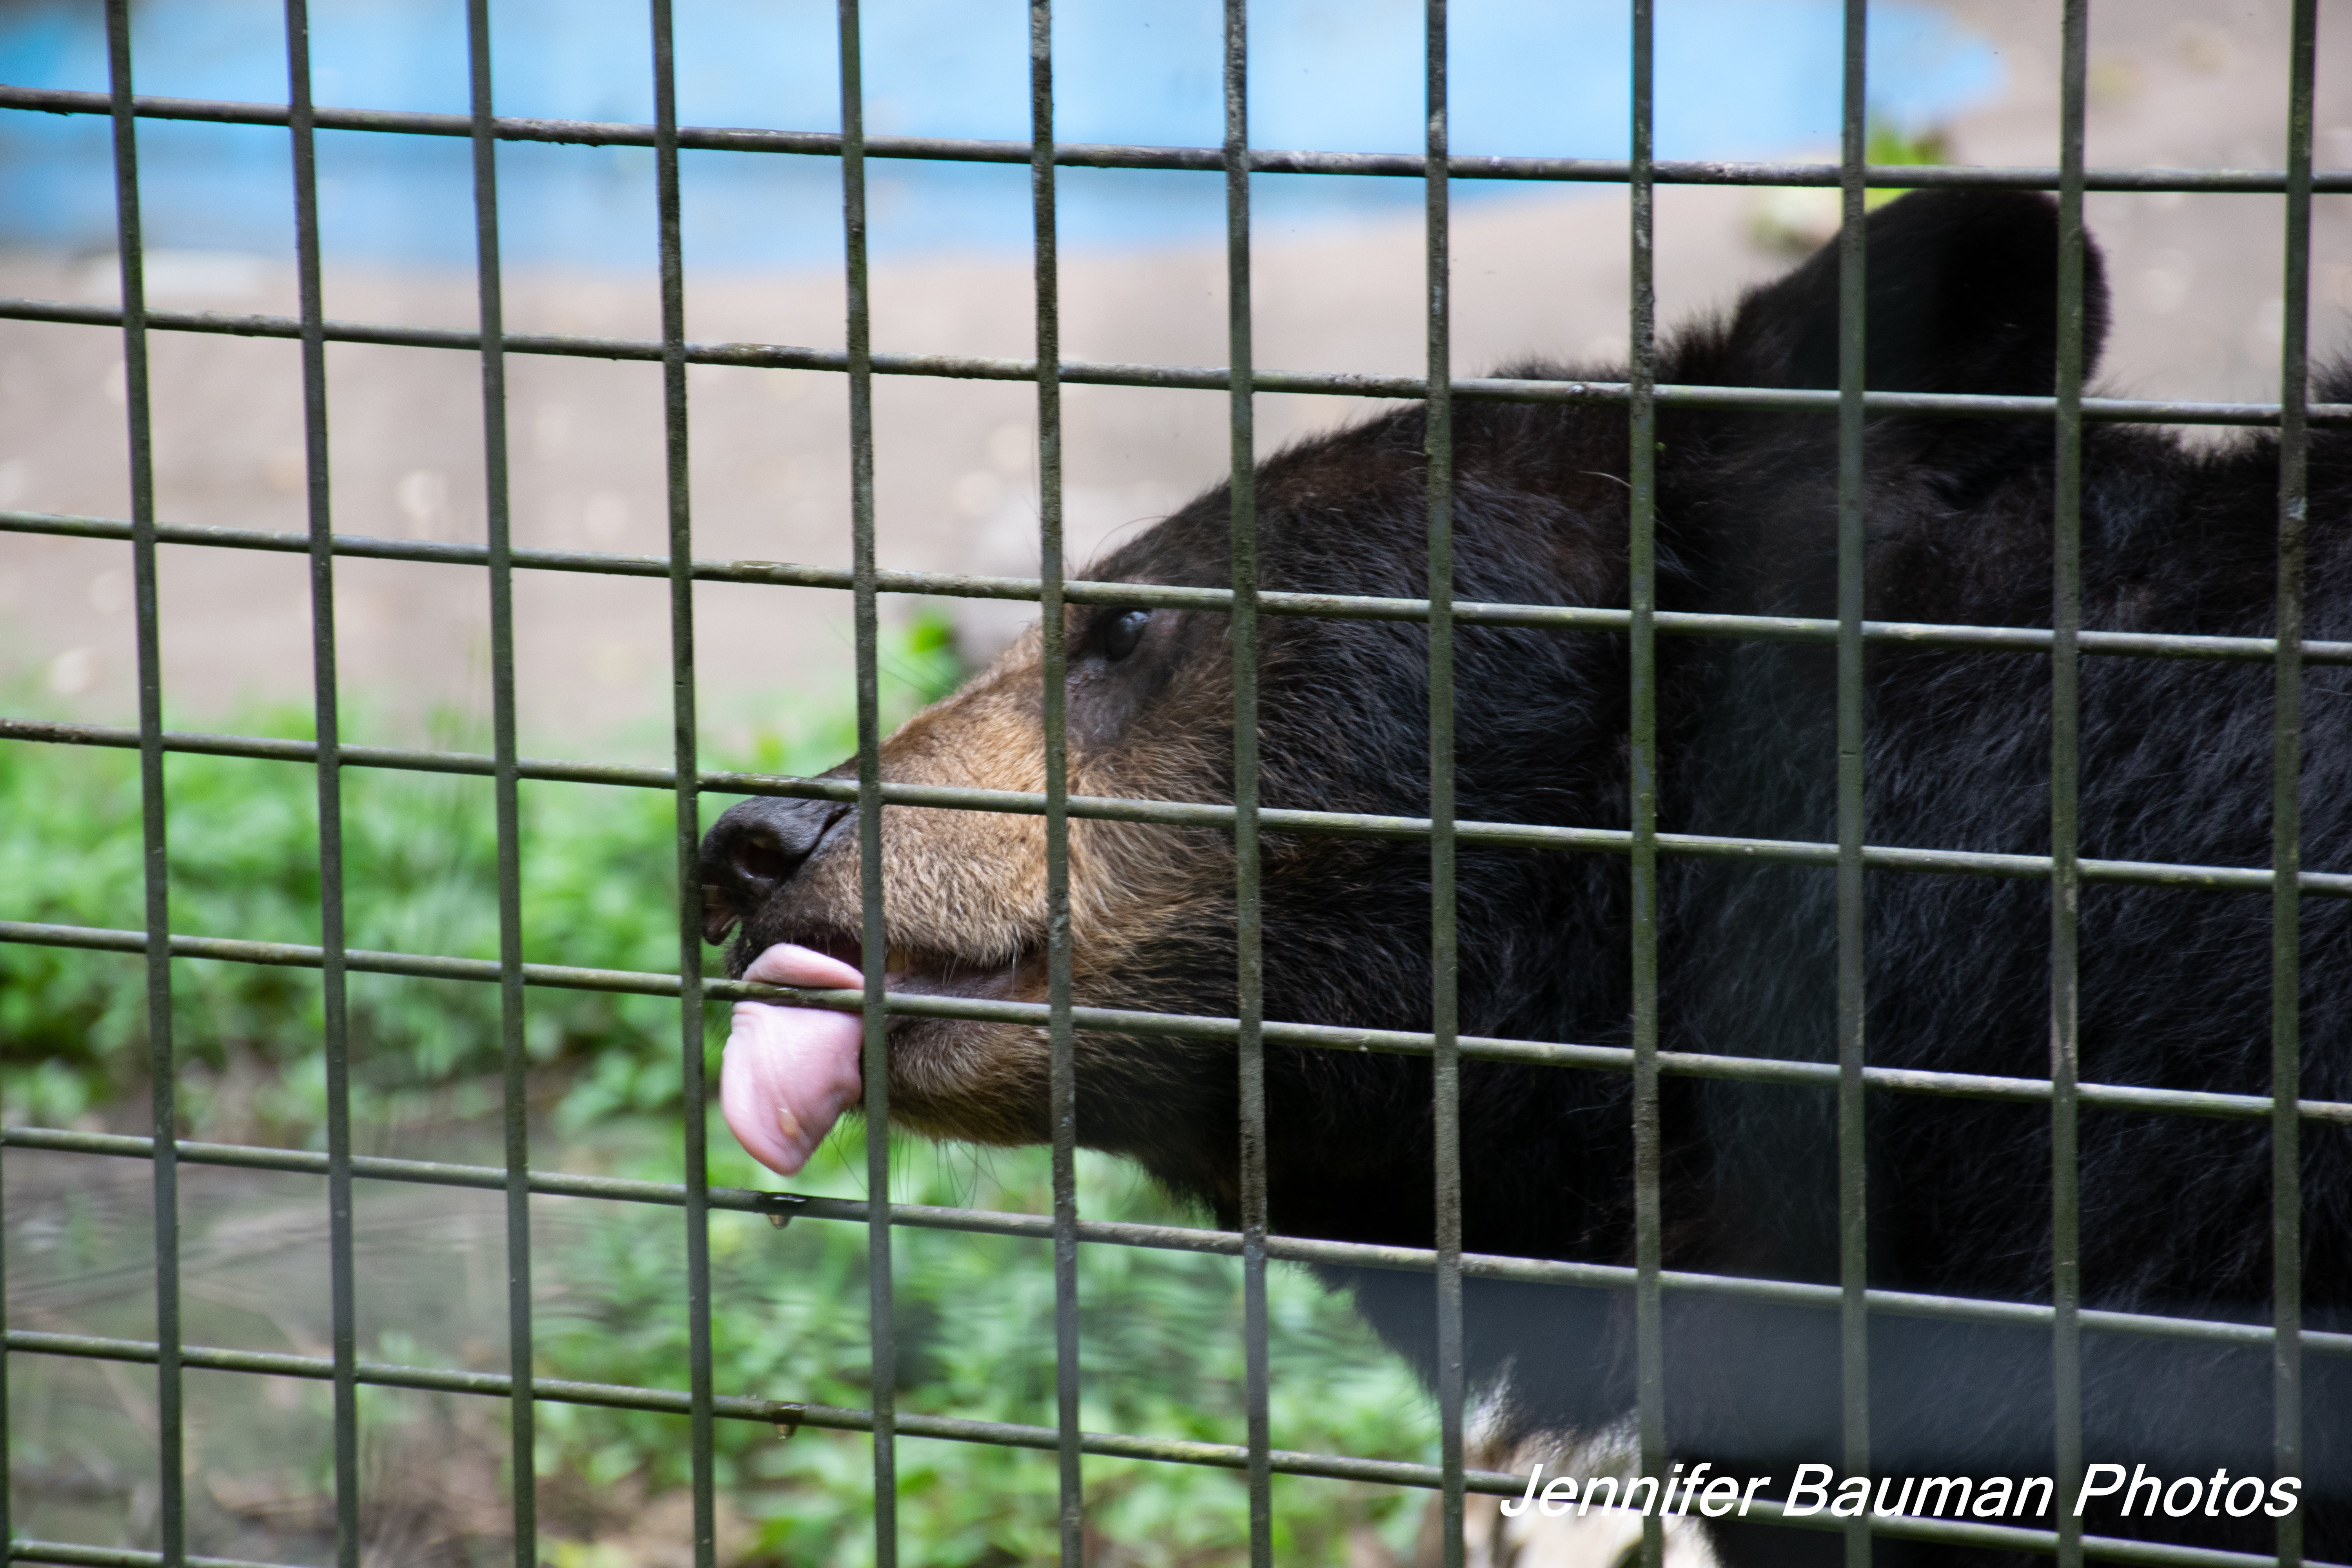 Mandy snacking out on some honey put on the fence of the bear enclosure.